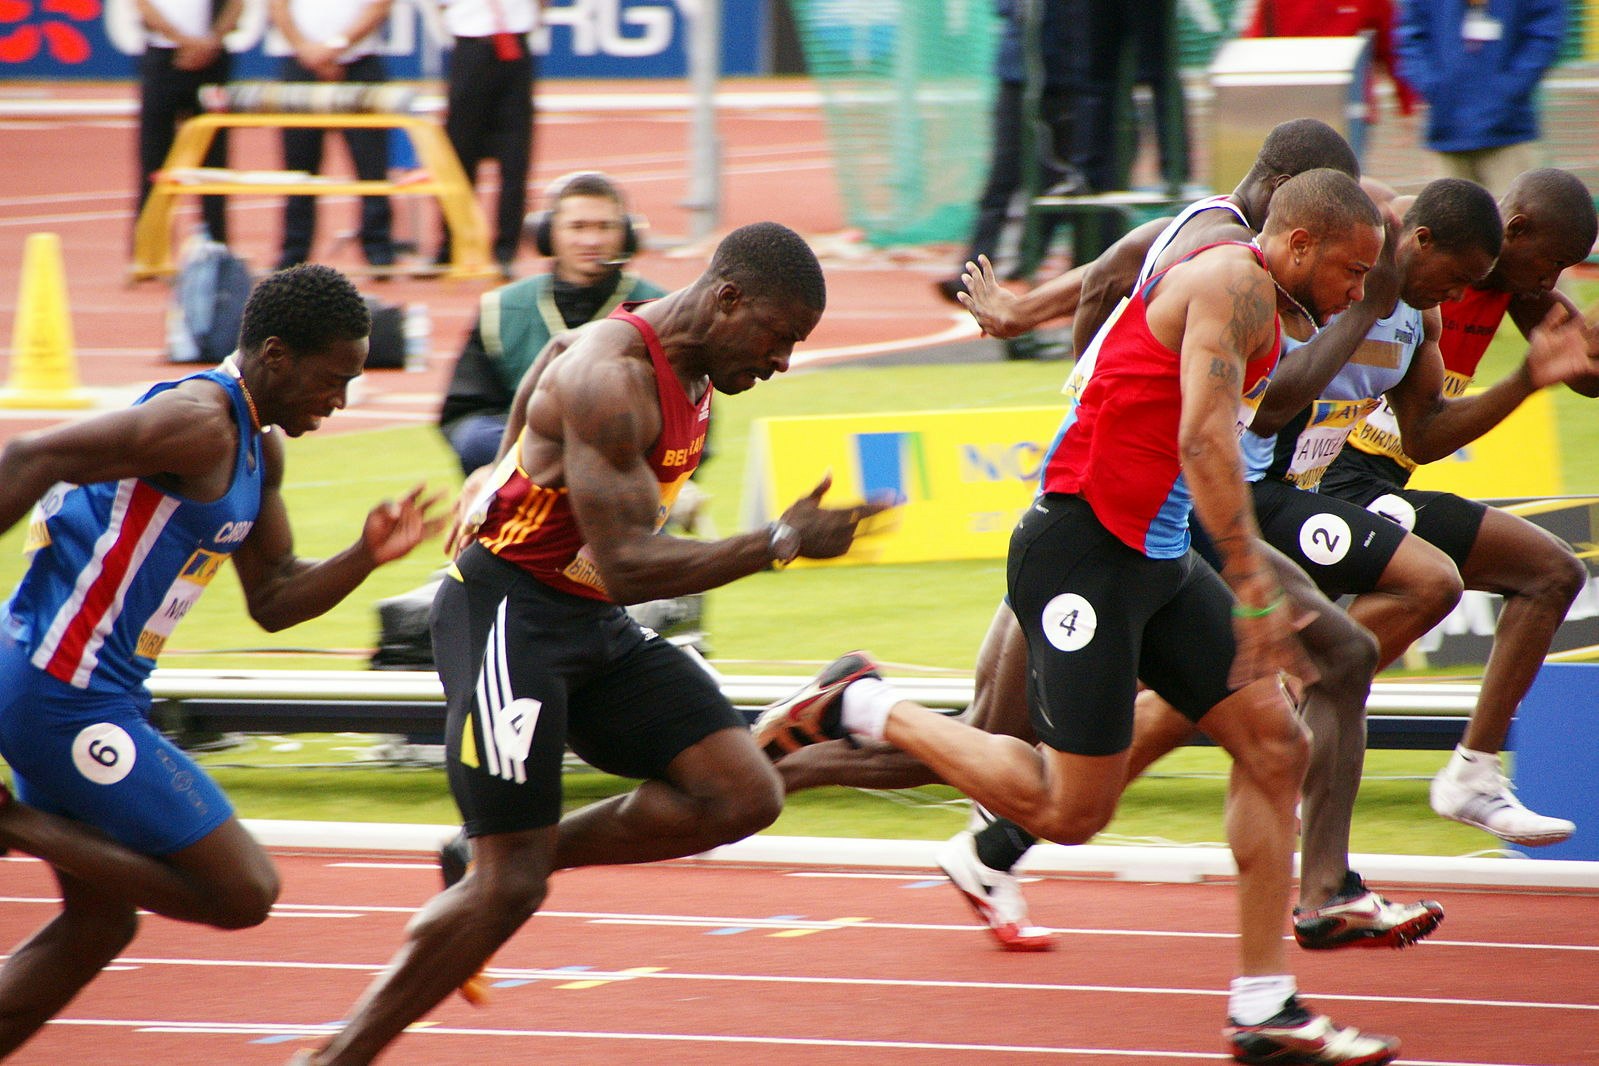 Sprinters, including Christian Malcolm, Dwain Chambers, Rikki Fifton, competing at the UK Olympic Trials, Alexander Stadium, Birmingham, 2008